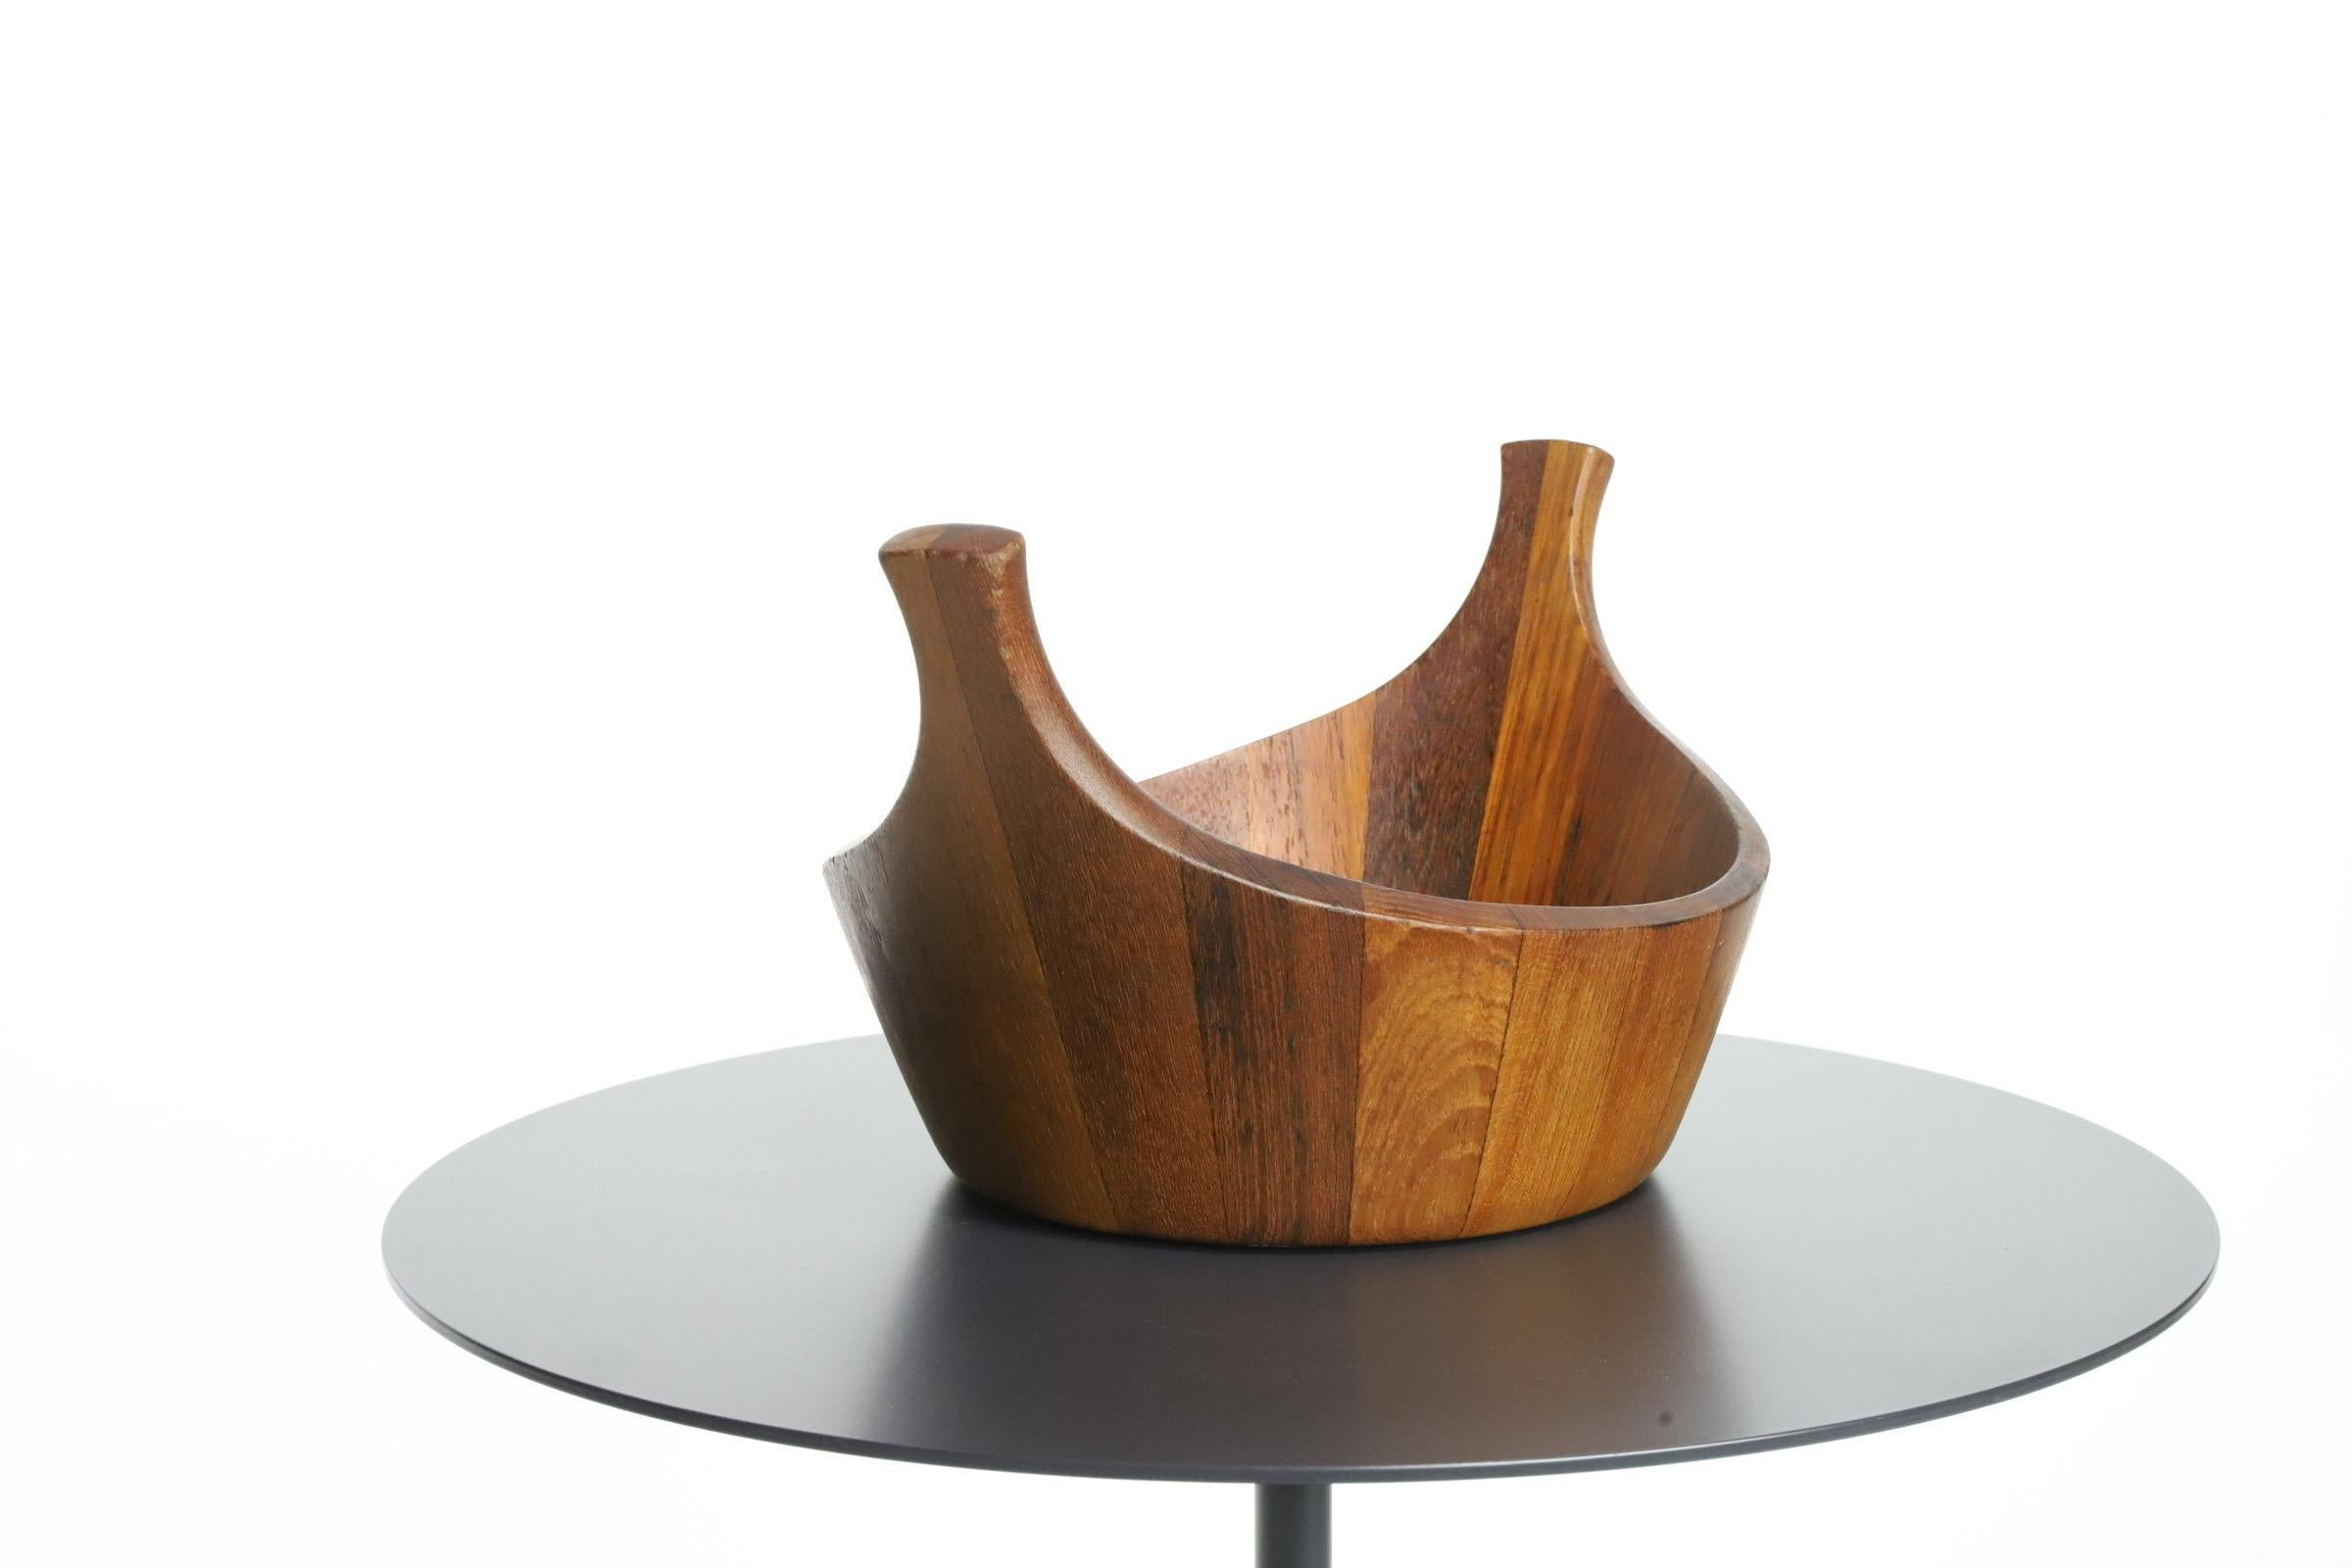 Dansk Teak Staved Viking Salad Bowl by Jens Quistgaard In Good Condition For Sale In Oklahoma City, OK